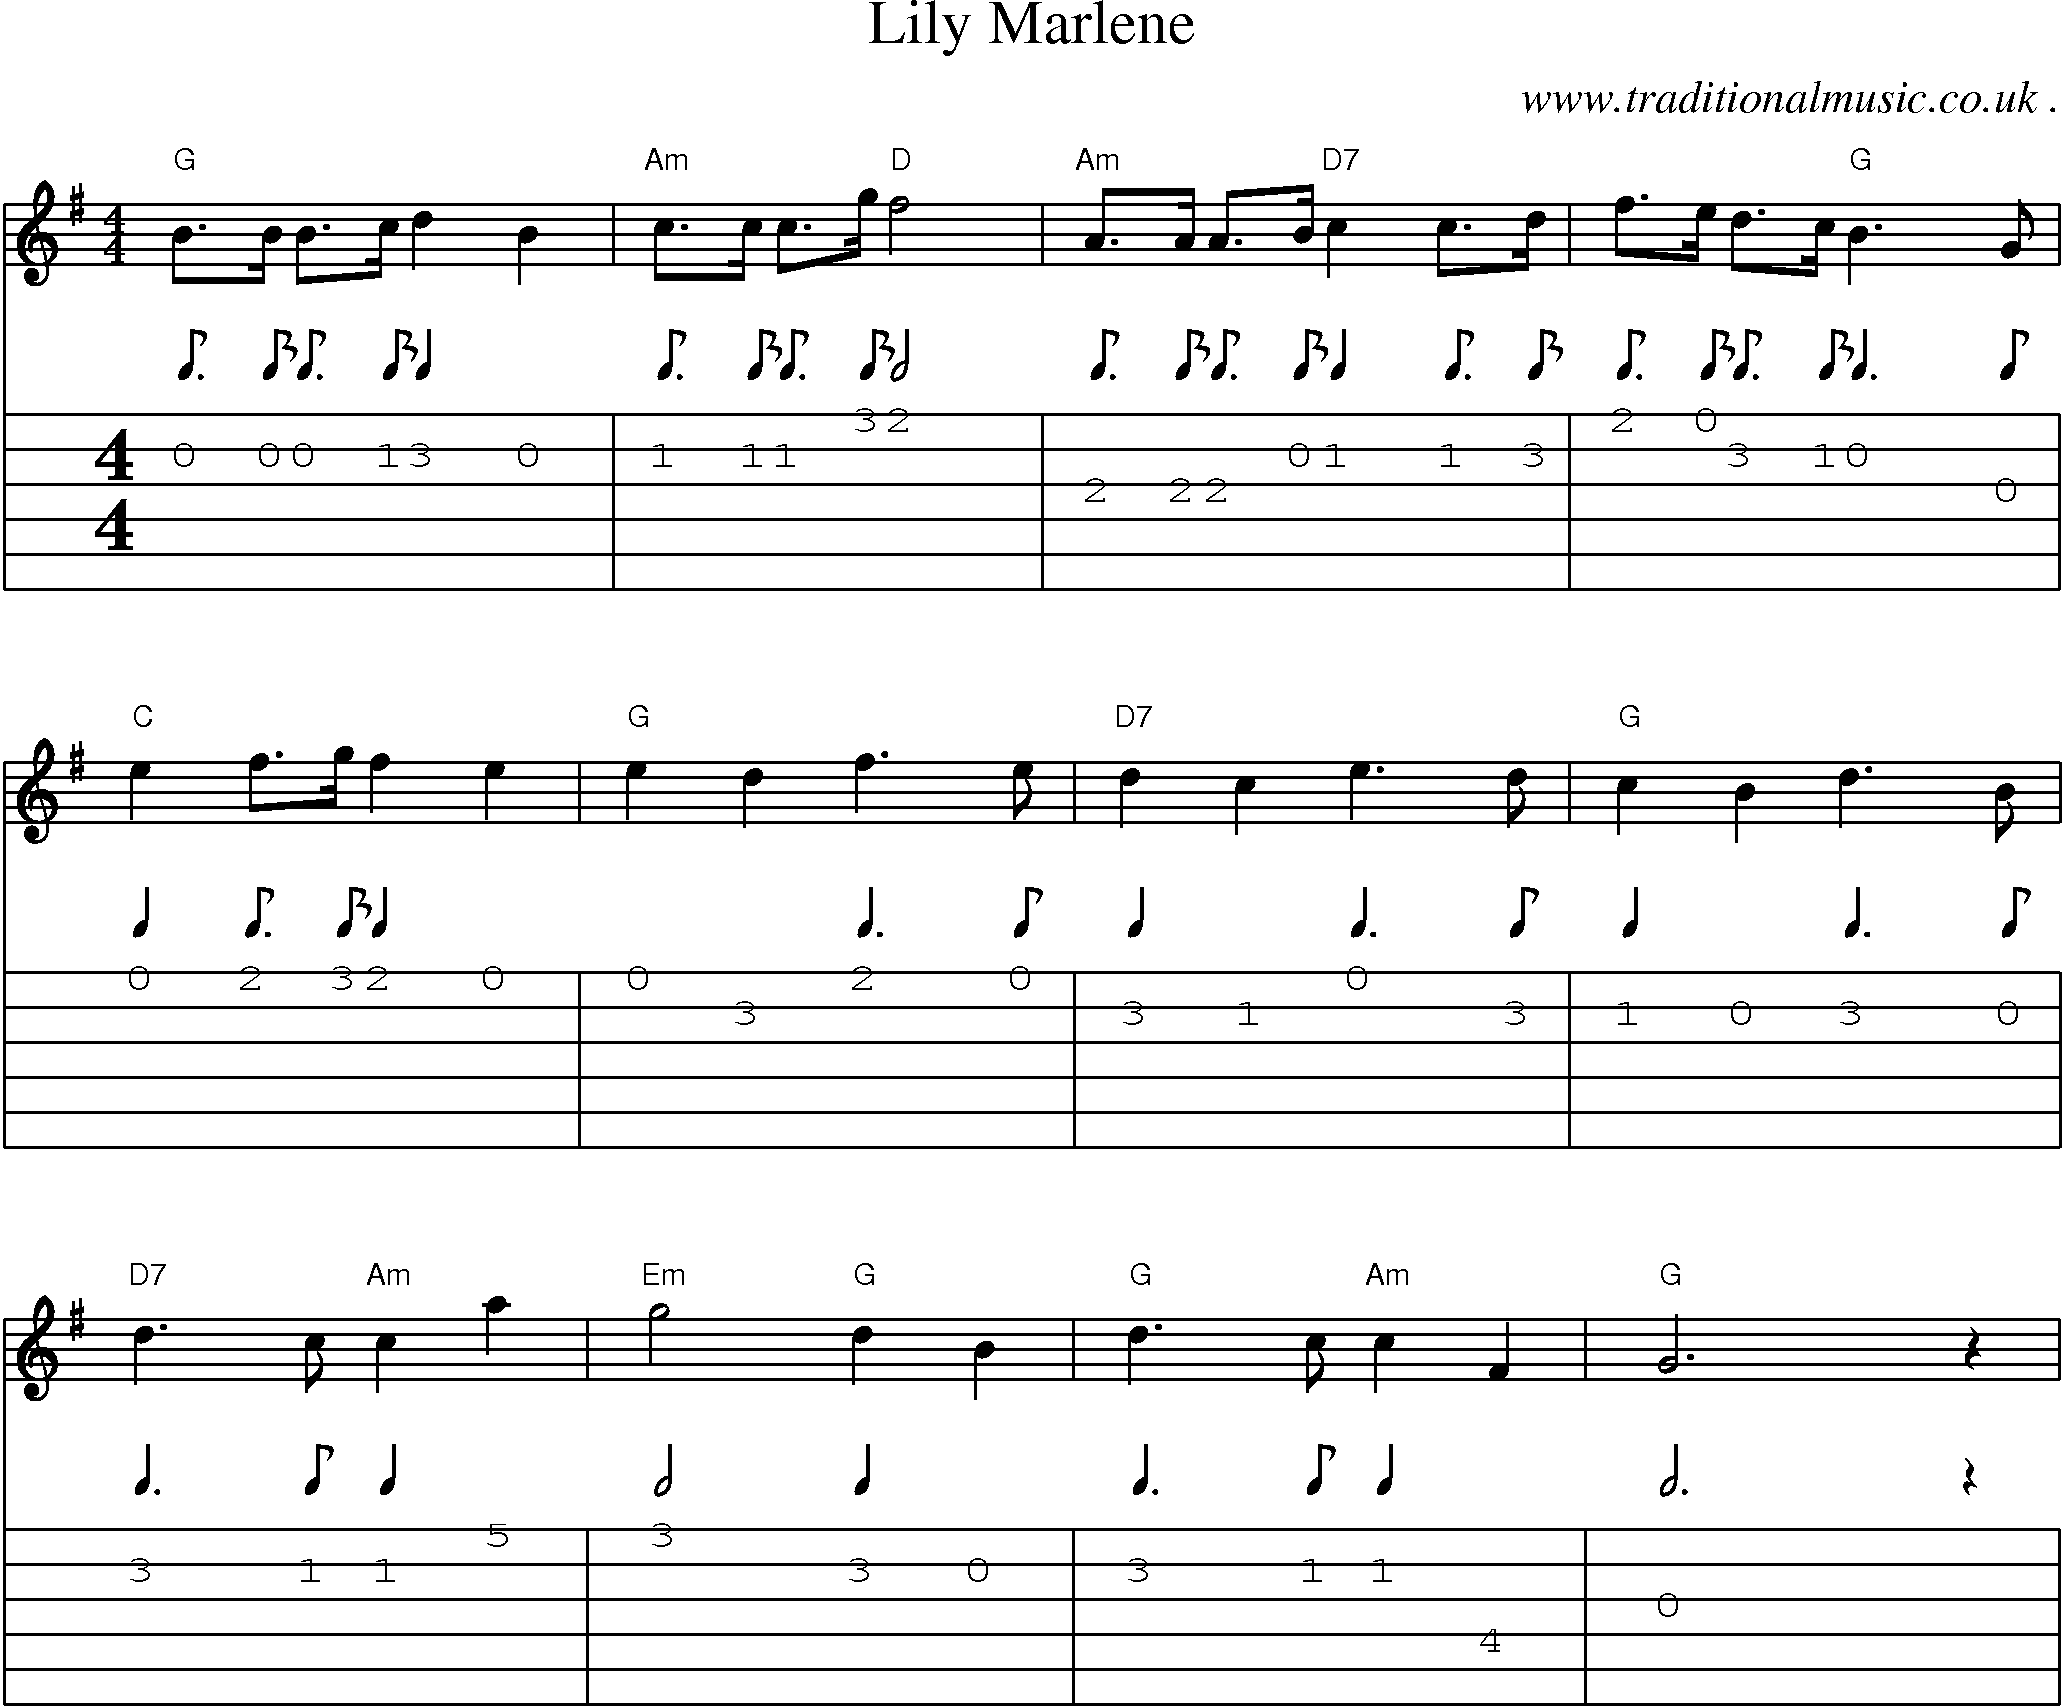 Music Score and Guitar Tabs for Lily Marlene